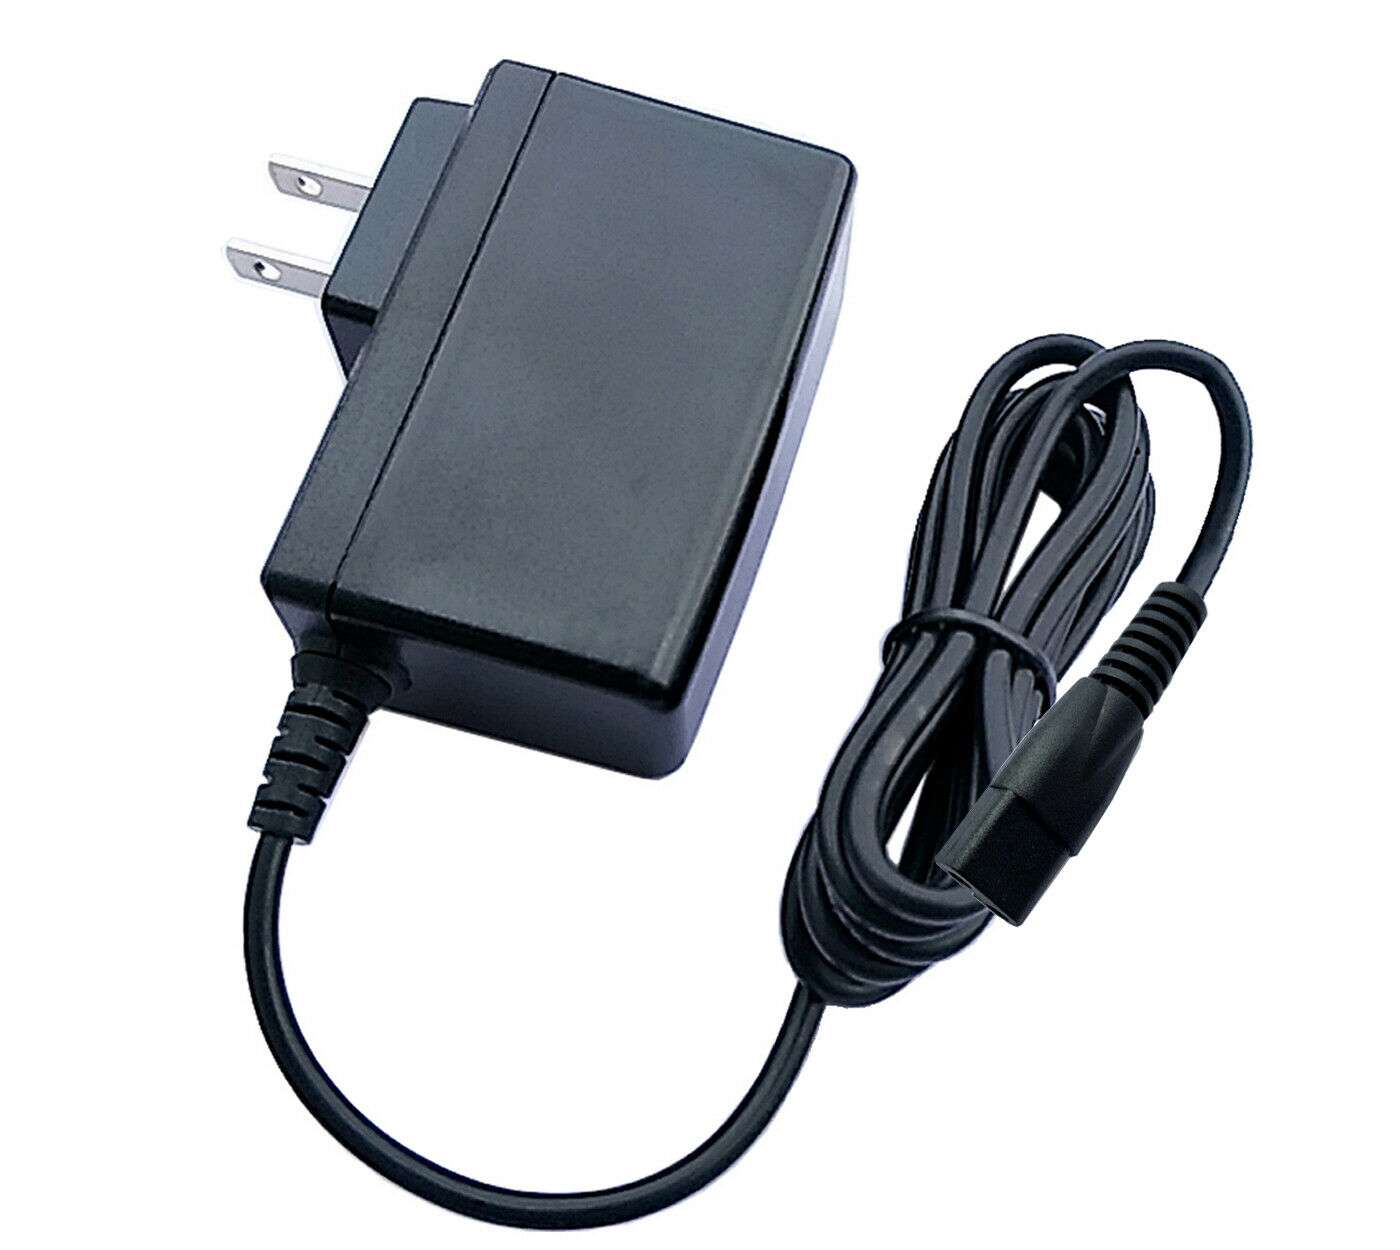 AC/DC Adapter For FrSky Taranis PLUS X9D X90 CE2200 Power Supply Battery Charger Technical Specifications: 1 AC input v